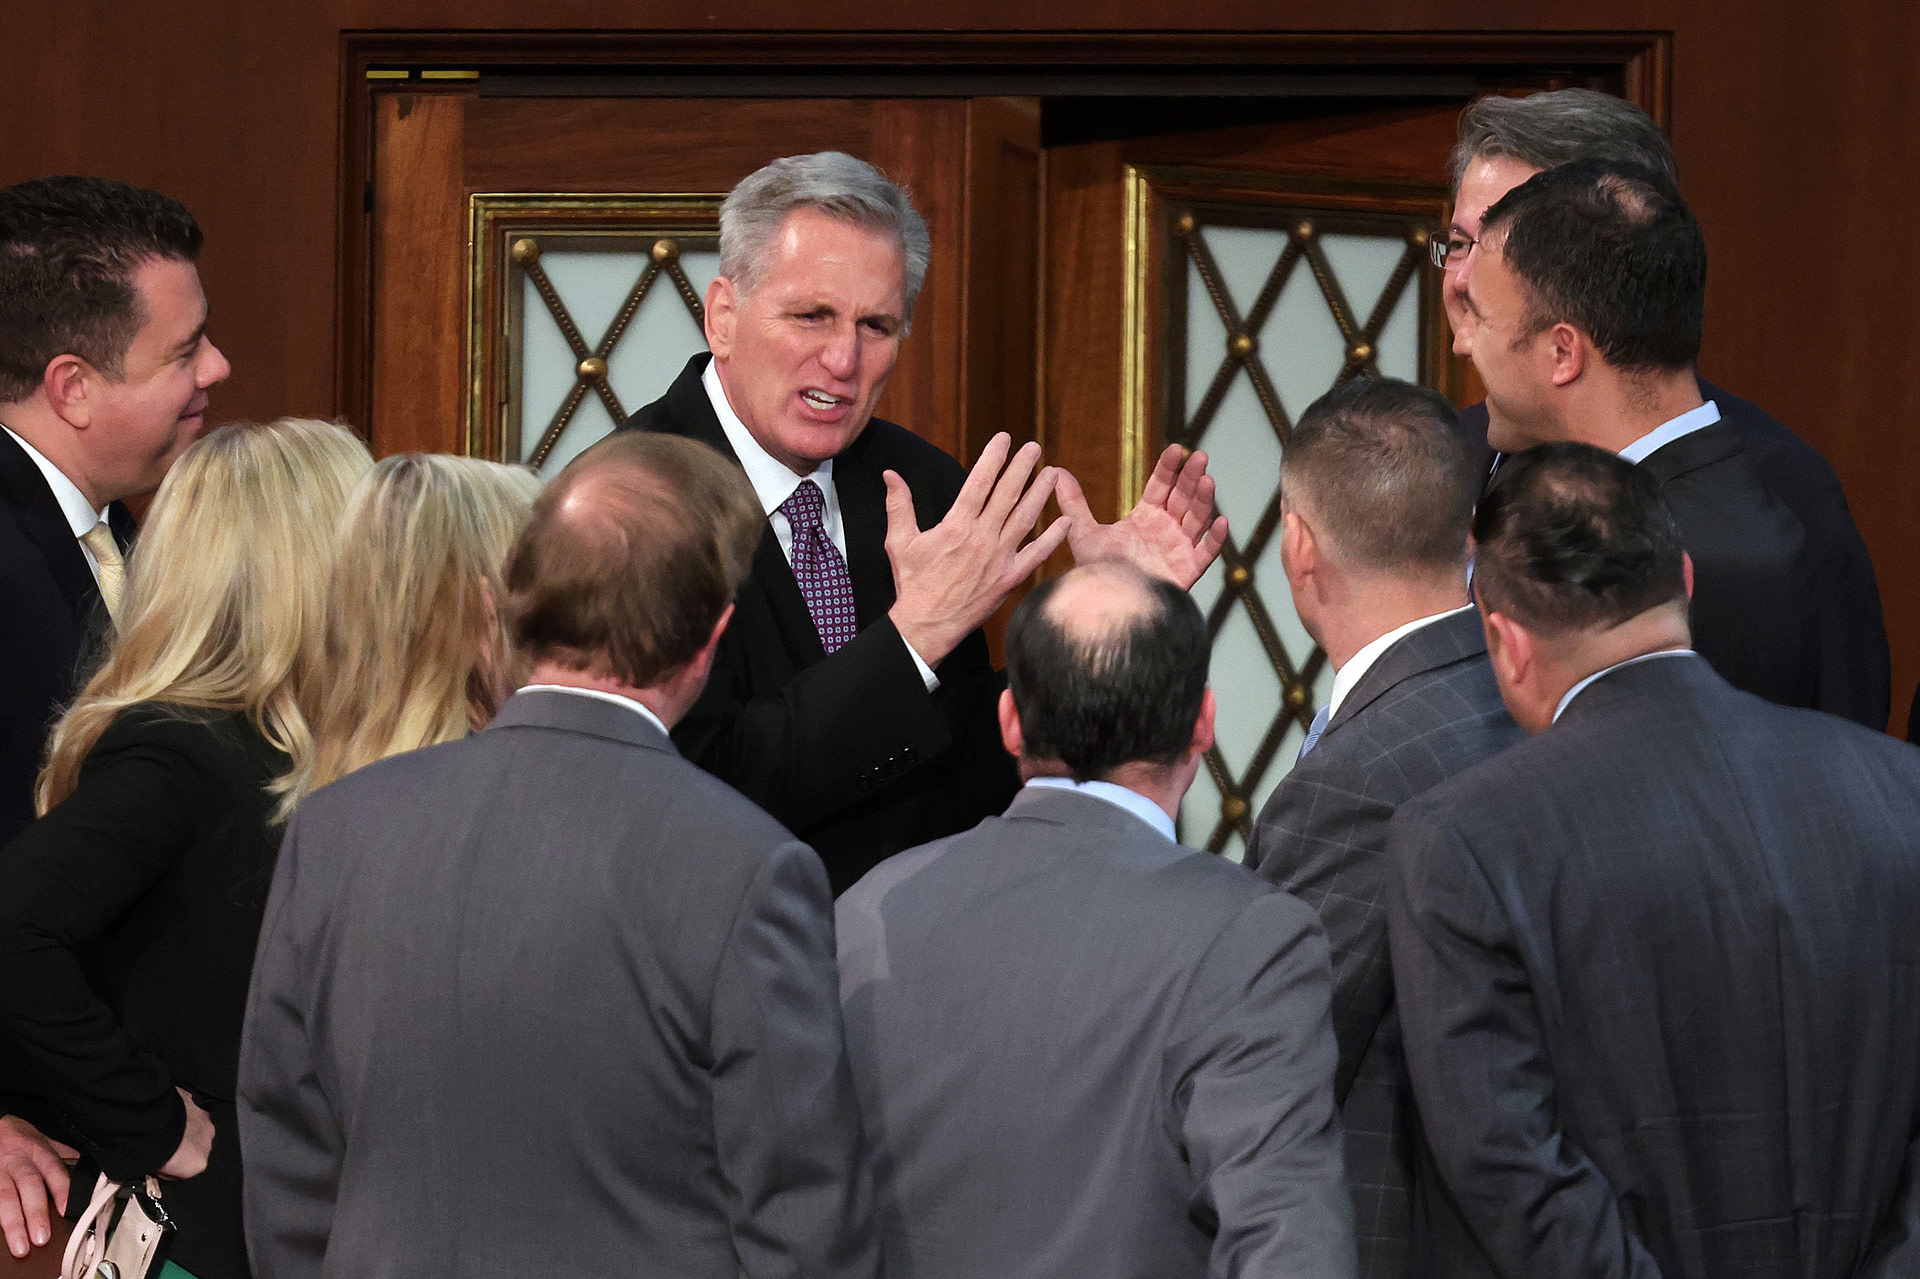 McCarthy’s bid for speaker of the House enters third day